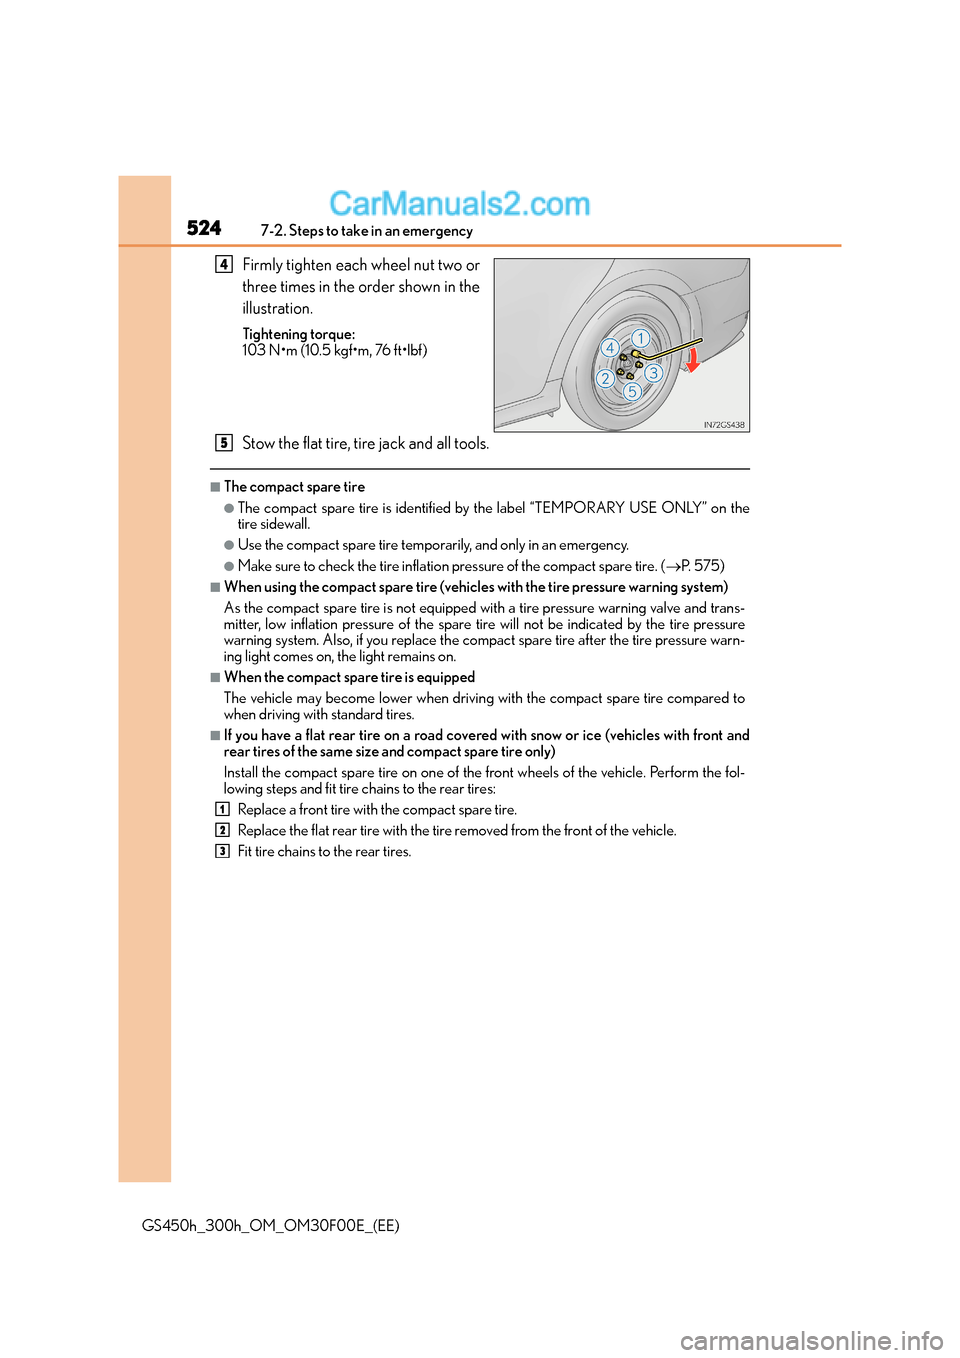 Lexus GS300h 2016 Service Manual 5247-2. Steps to take in an emergency
GS450h_300h_OM_OM30F00E_(EE)
Firmly tighten each wheel nut two or
three times in the order shown in the
illustration.
Tightening torque:
103 N•m (10.5 kgf•m, 